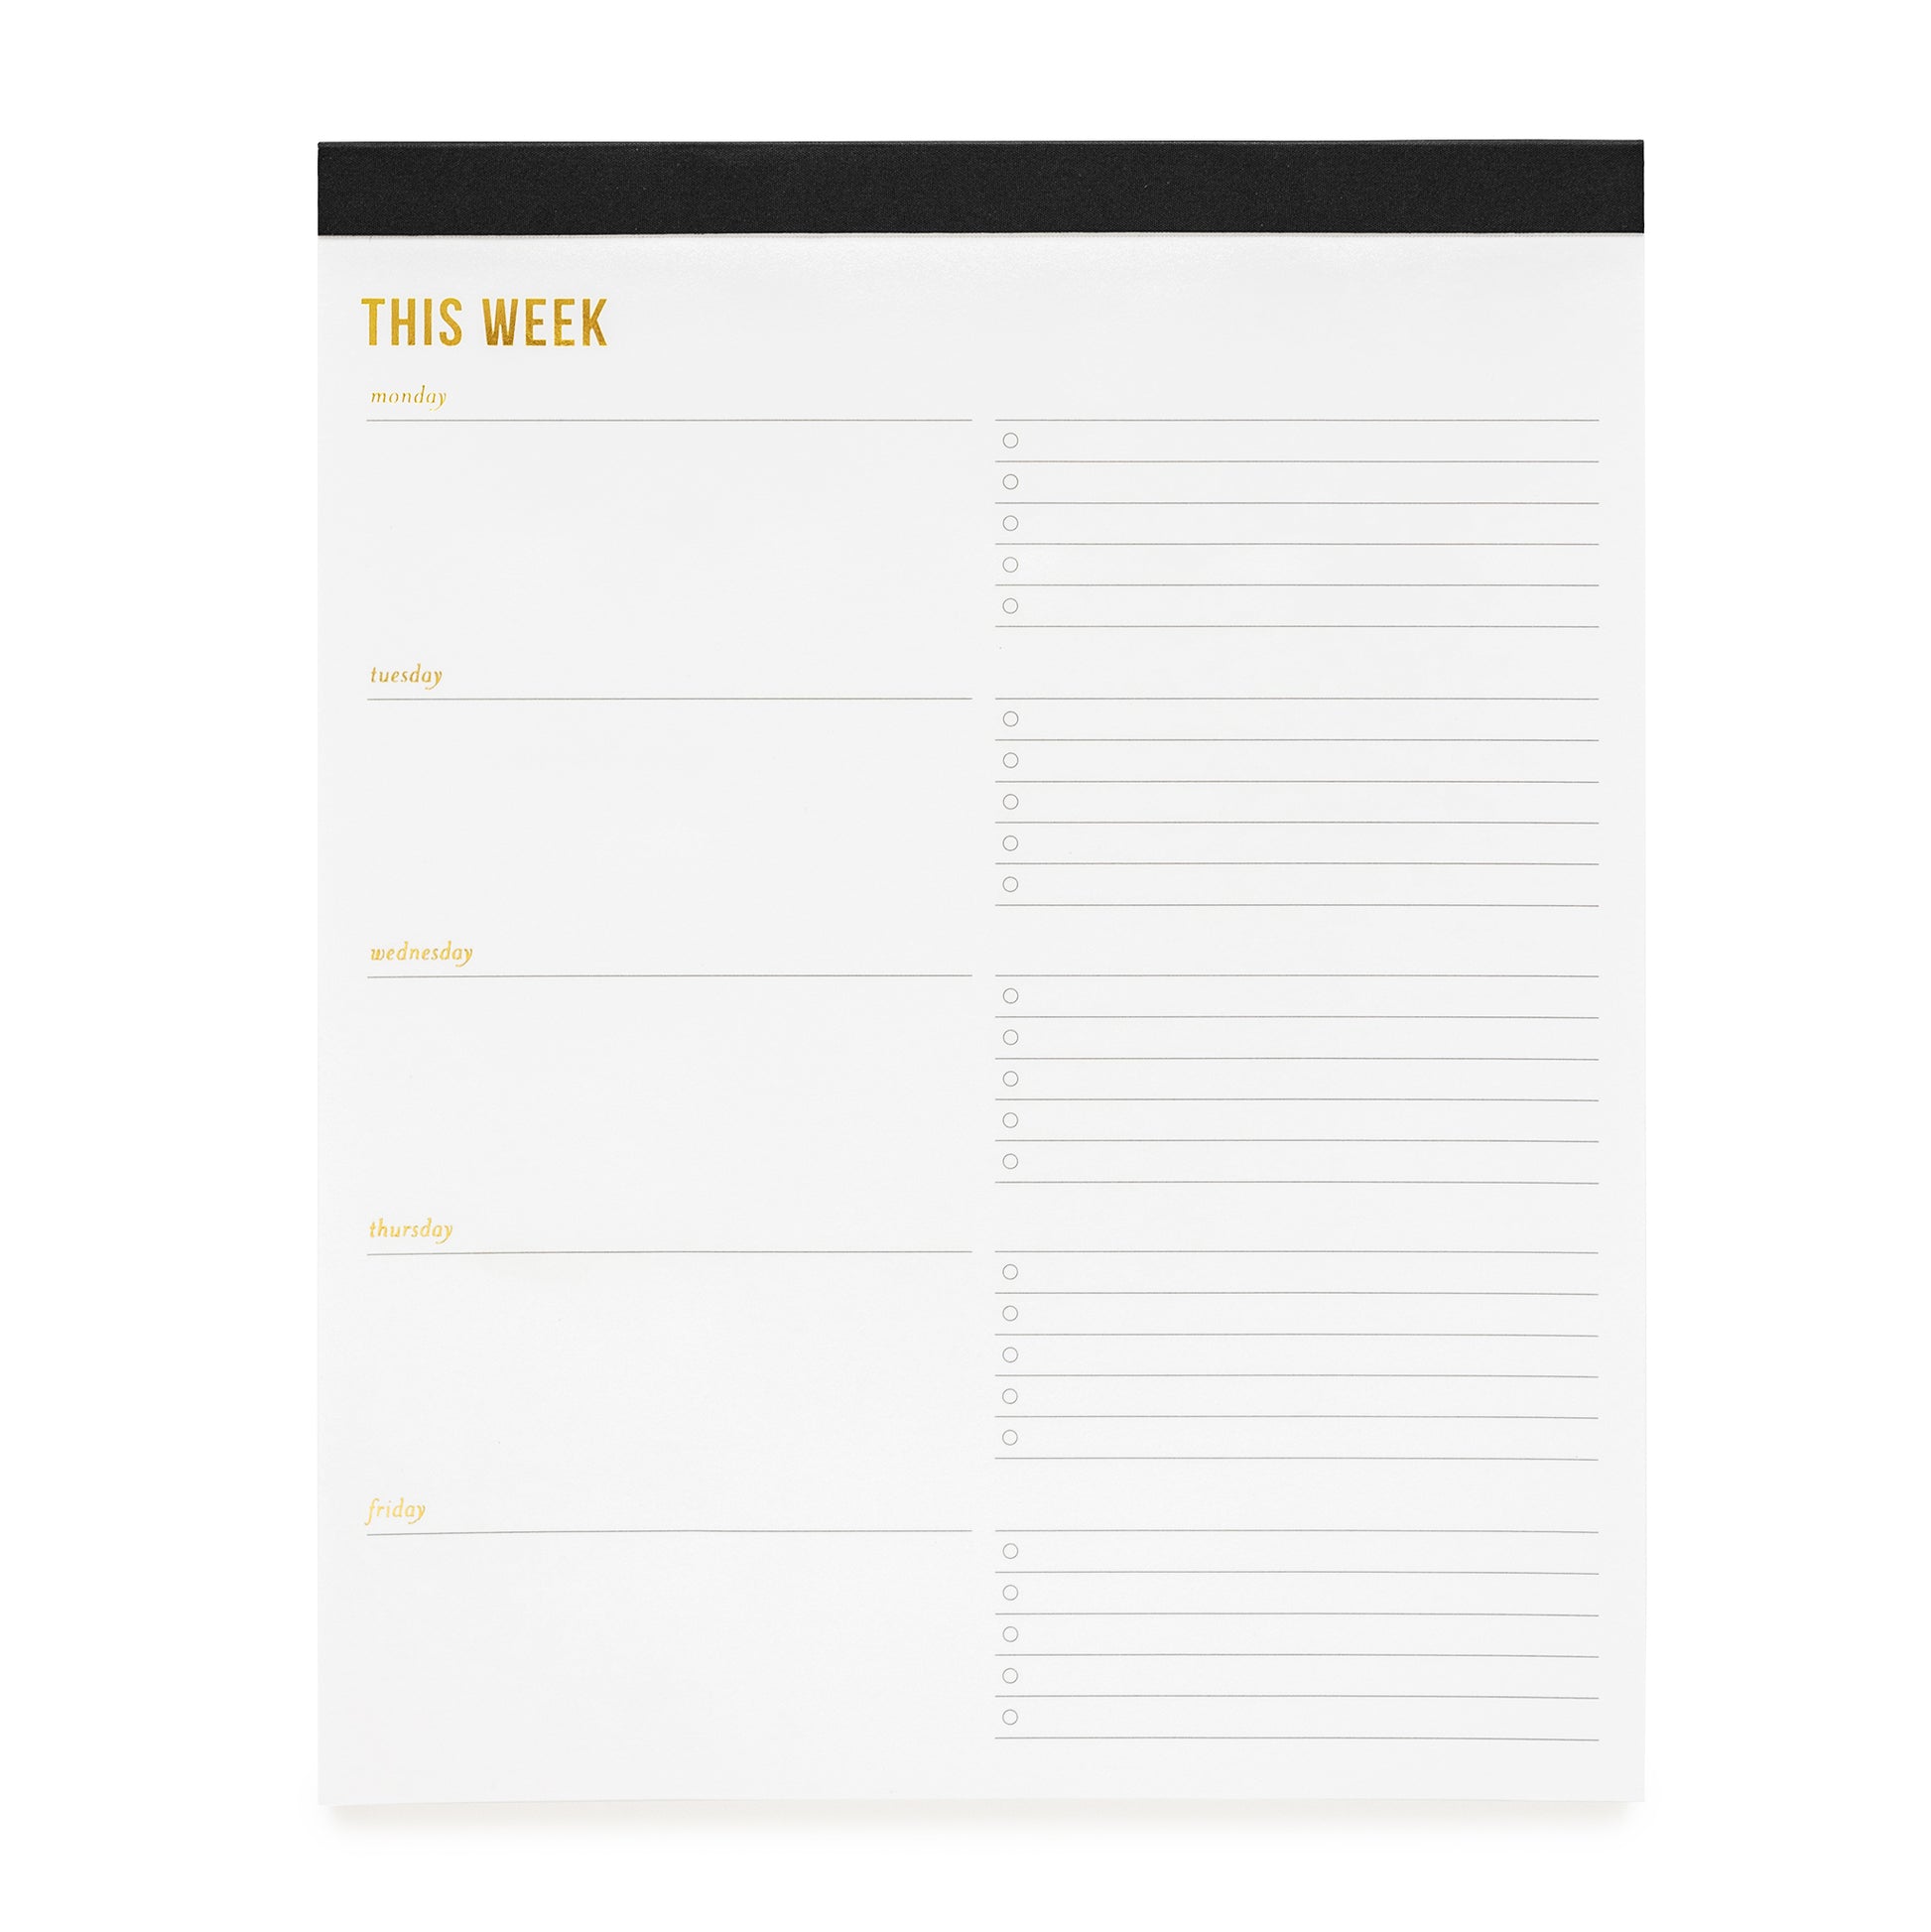 This Week notepad with black binding and gold foil details